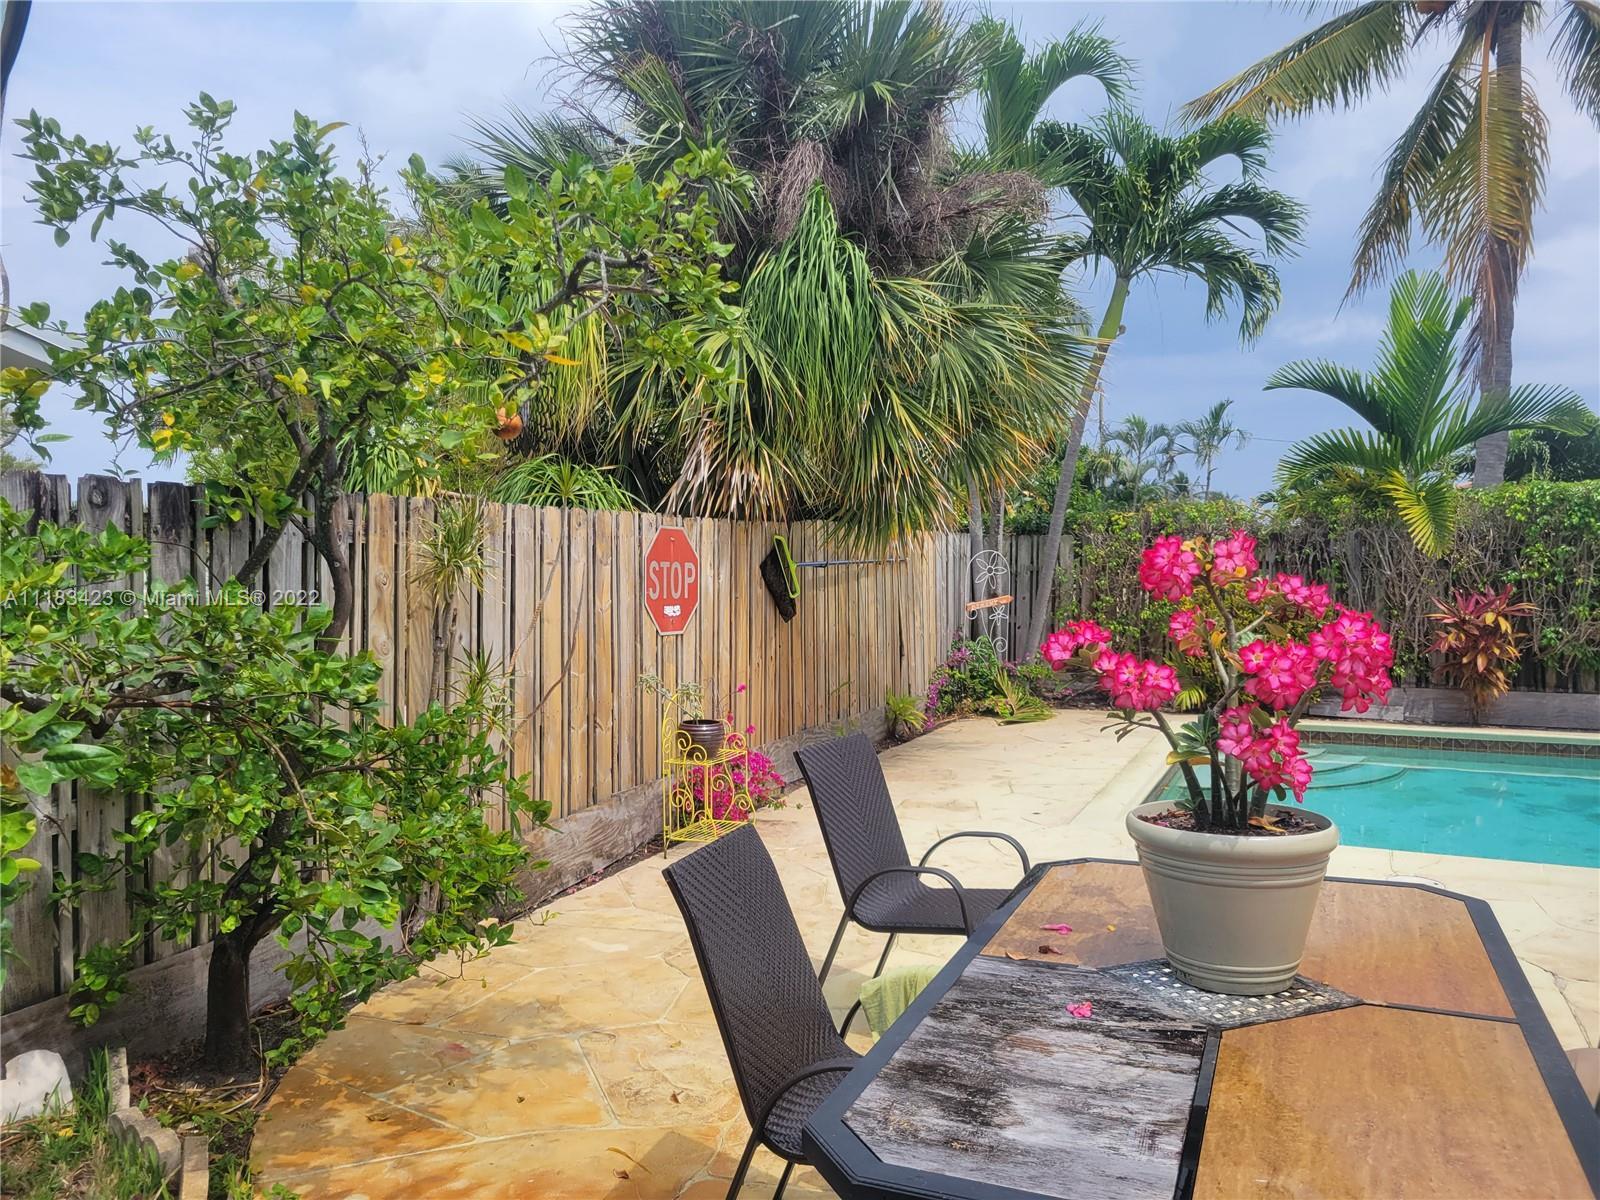 You've found it! The perfect home to experience the South Florida lifestyle! This lovely corner-lot 